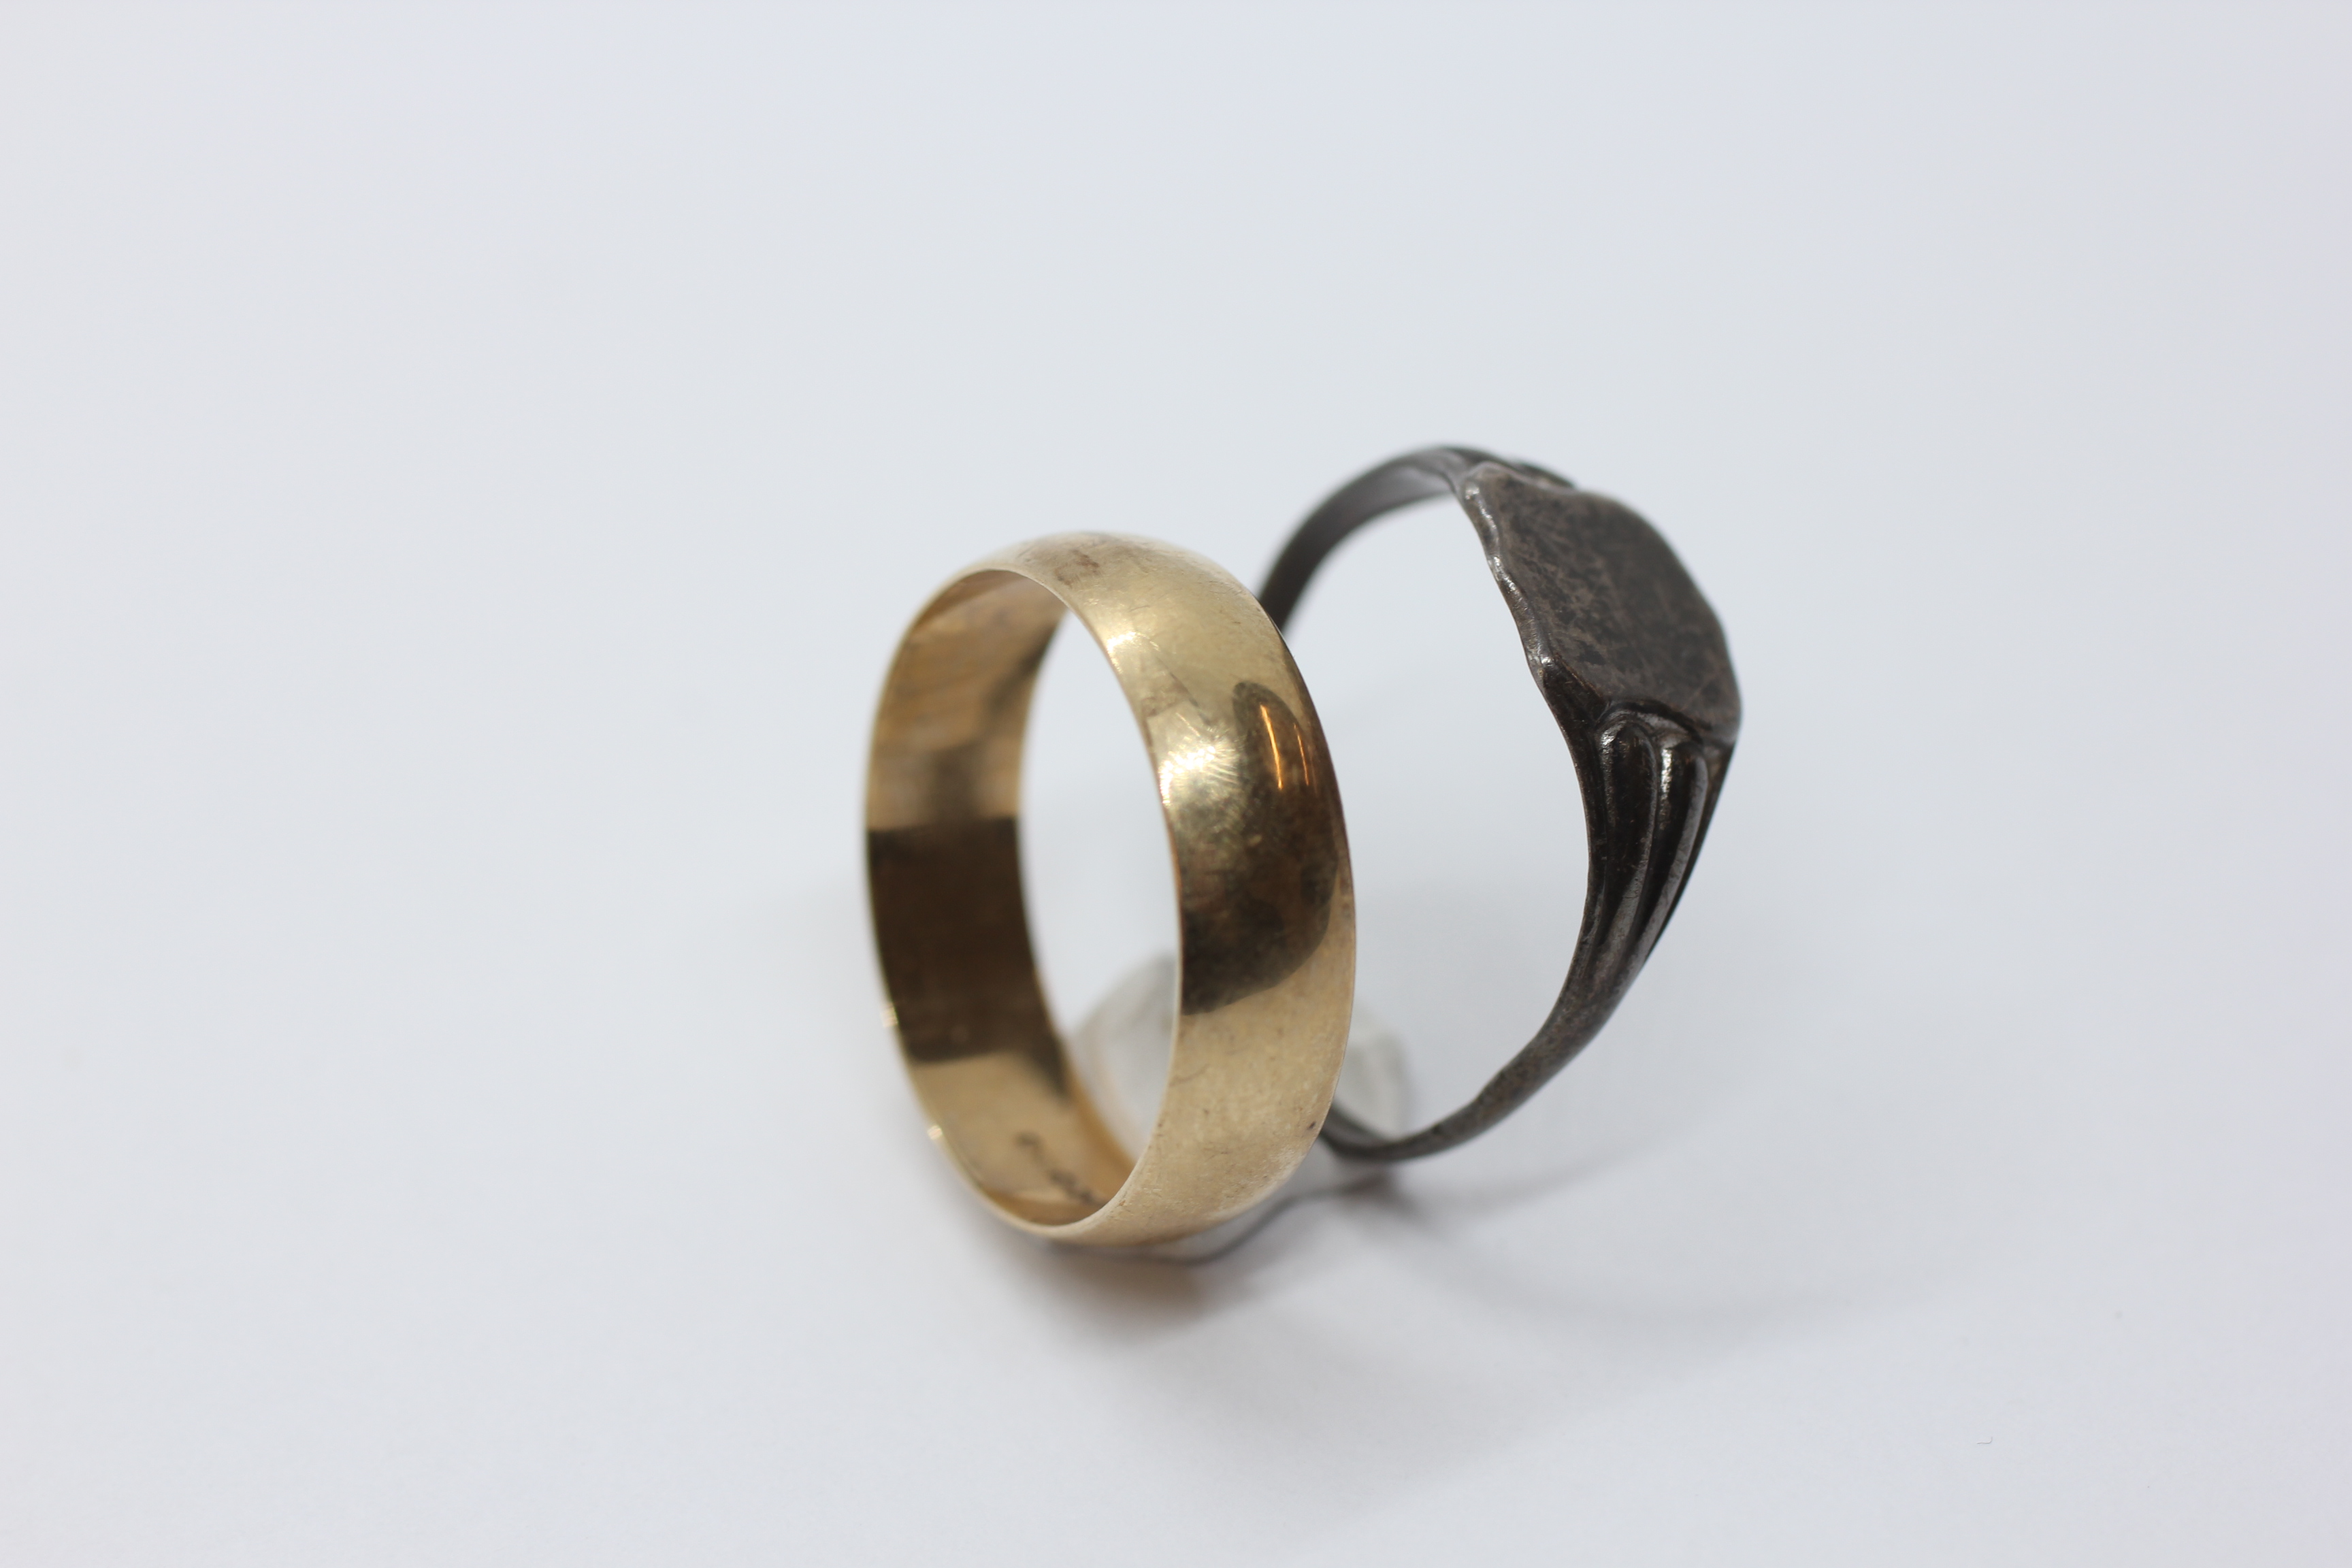 A 9CT GOLD WEDDING BAND AND A SILVER SIGNET RING. - Image 3 of 10